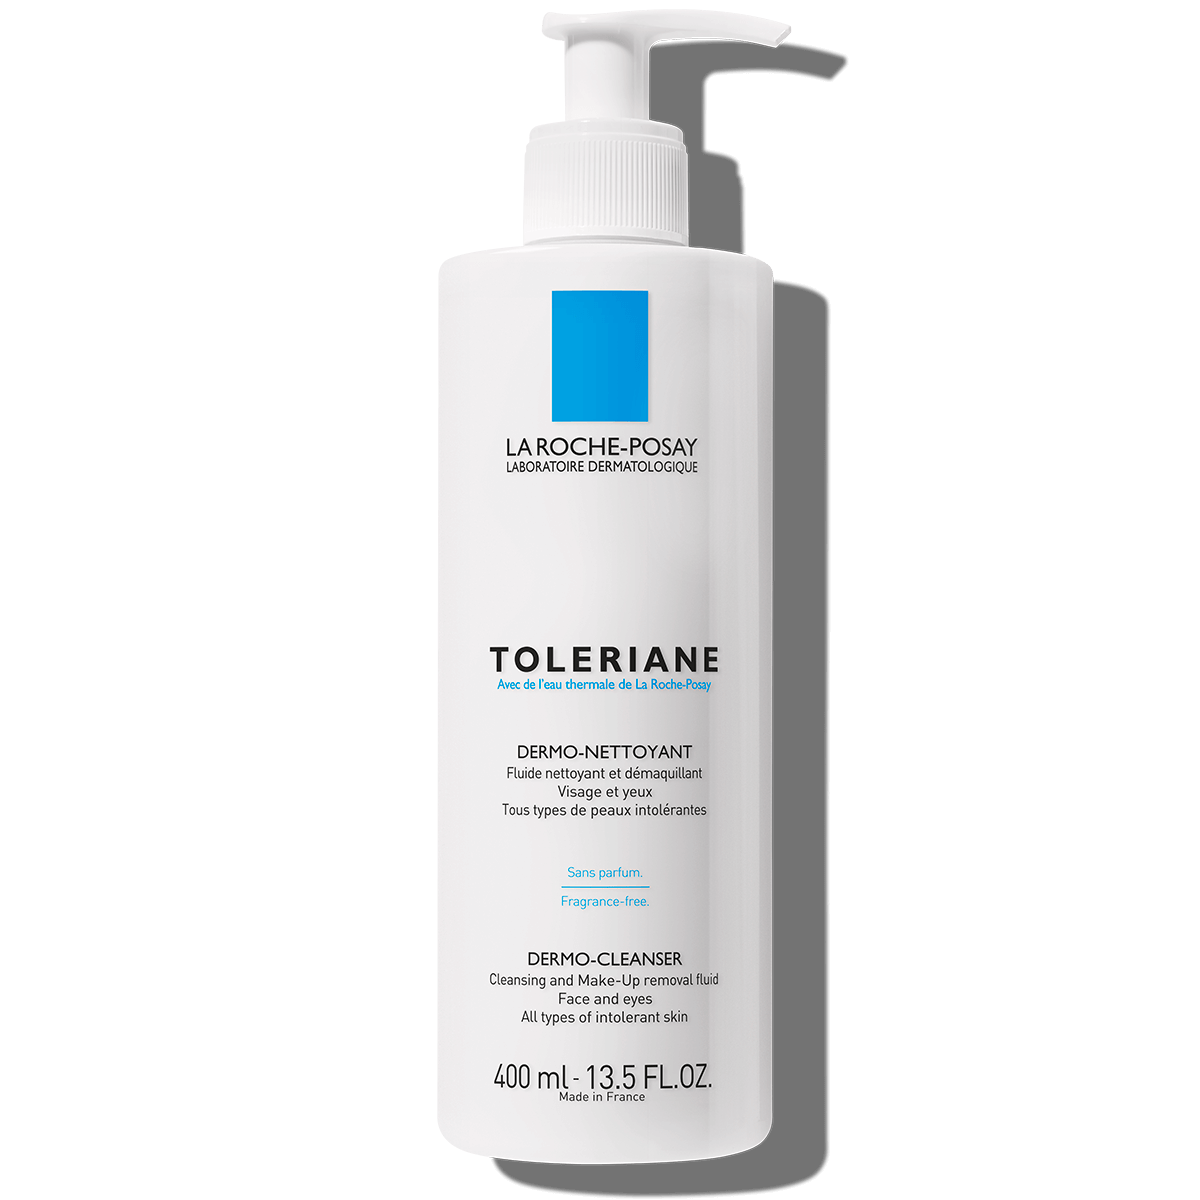 https://www.laroche-posay.sg/-/media/project/loreal/brand-sites/lrp/apac/sg/products/toleriane/dermo-cleanser/la-roche-posay-productpage-sensitive-allergic-toleriane-dermo-cleanser-400ml-3337872411830-front.png